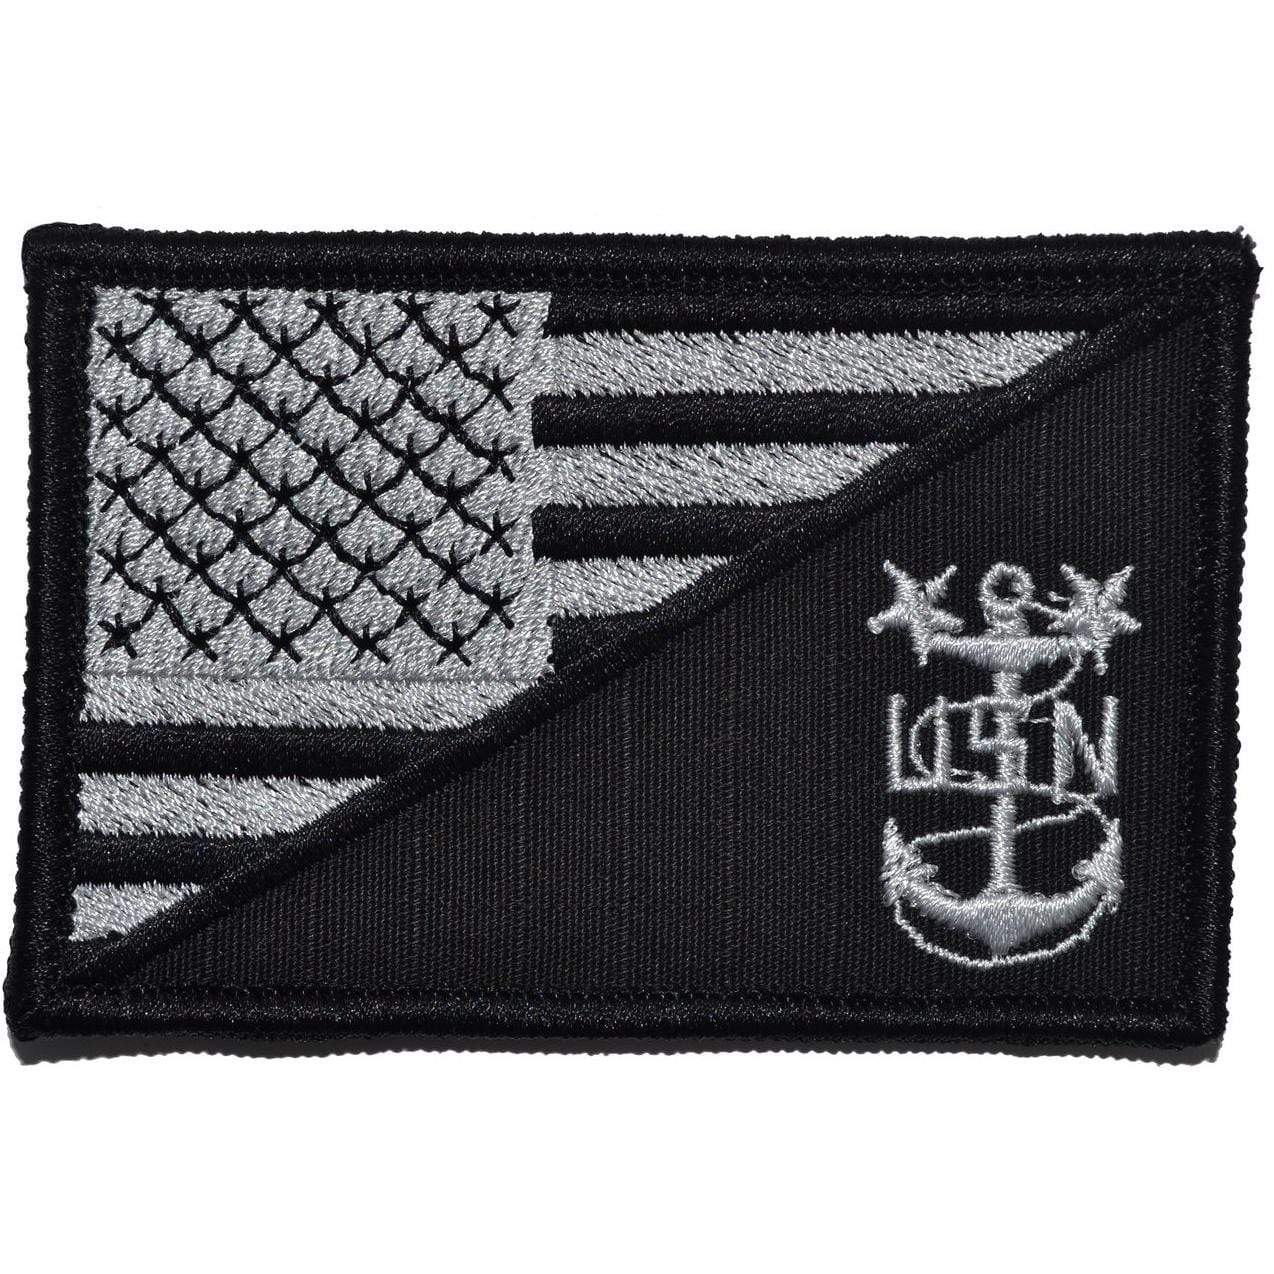 Tactical Gear Junkie Patches Black Navy MCPO Master Chief Petty Officer USA Flag - 2.25x3.5 inch Patch